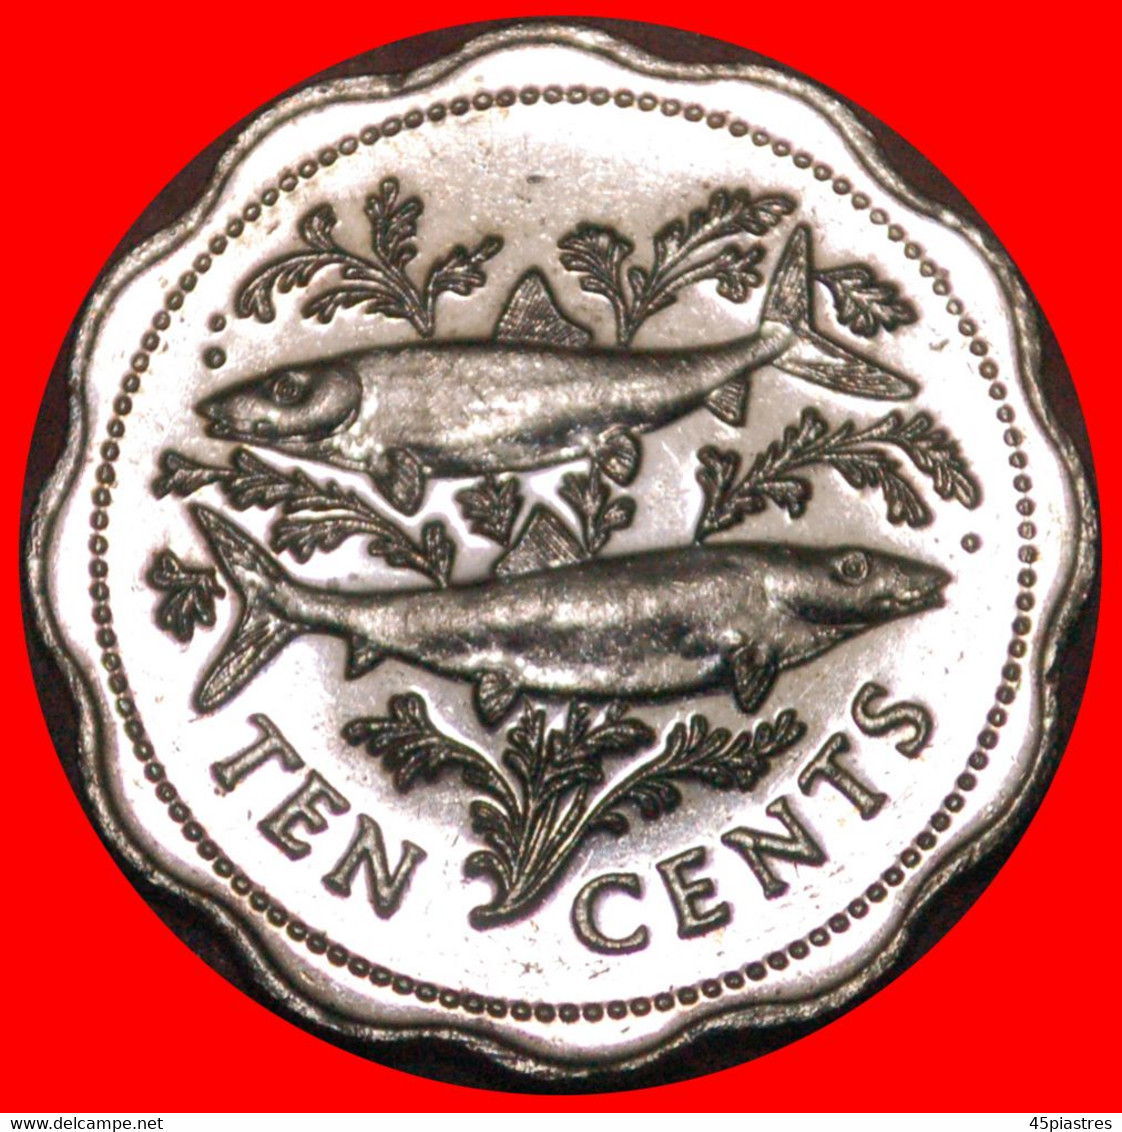 * GREAT BRITAIN (1974-2005): THE BAHAMAS ★ 10 CENTS 1998! MINT LUSTRE! FISHES AND SHIP!  LOW START ★ NO RESERVE! - Bahamas